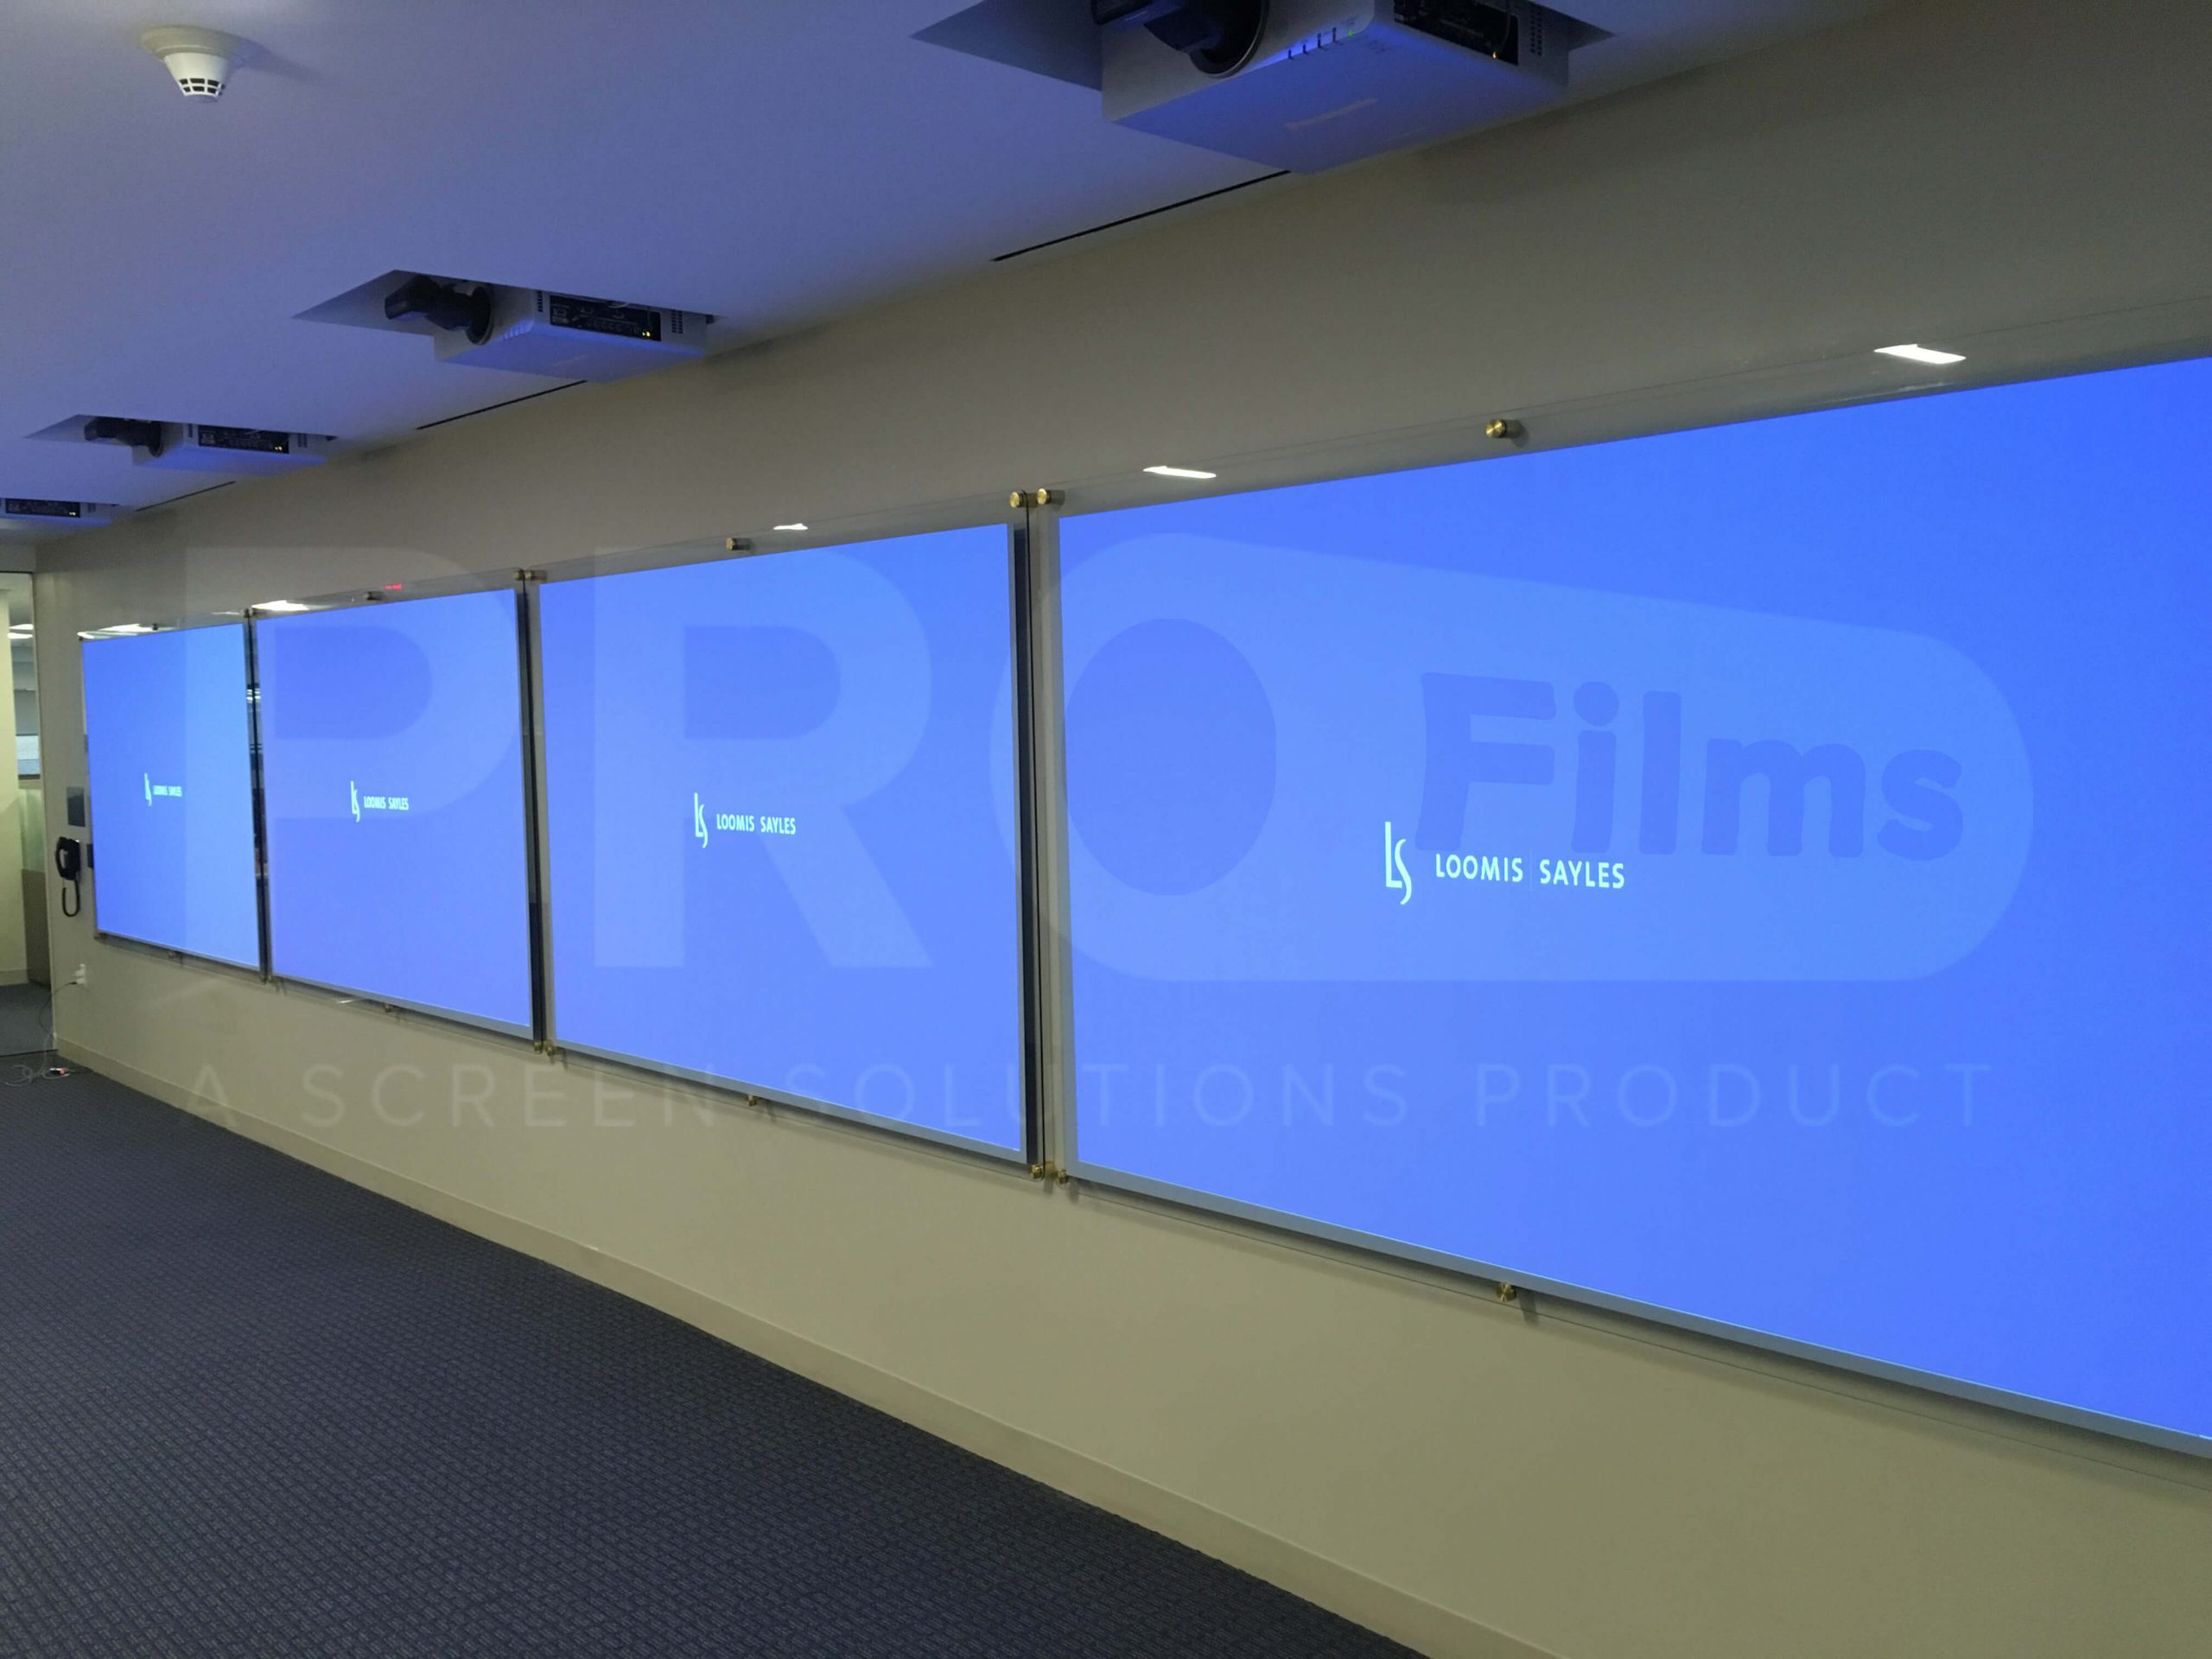 How to Choose a Motorized Glass Projection Screen Film? (Self-Adhesive projection film)